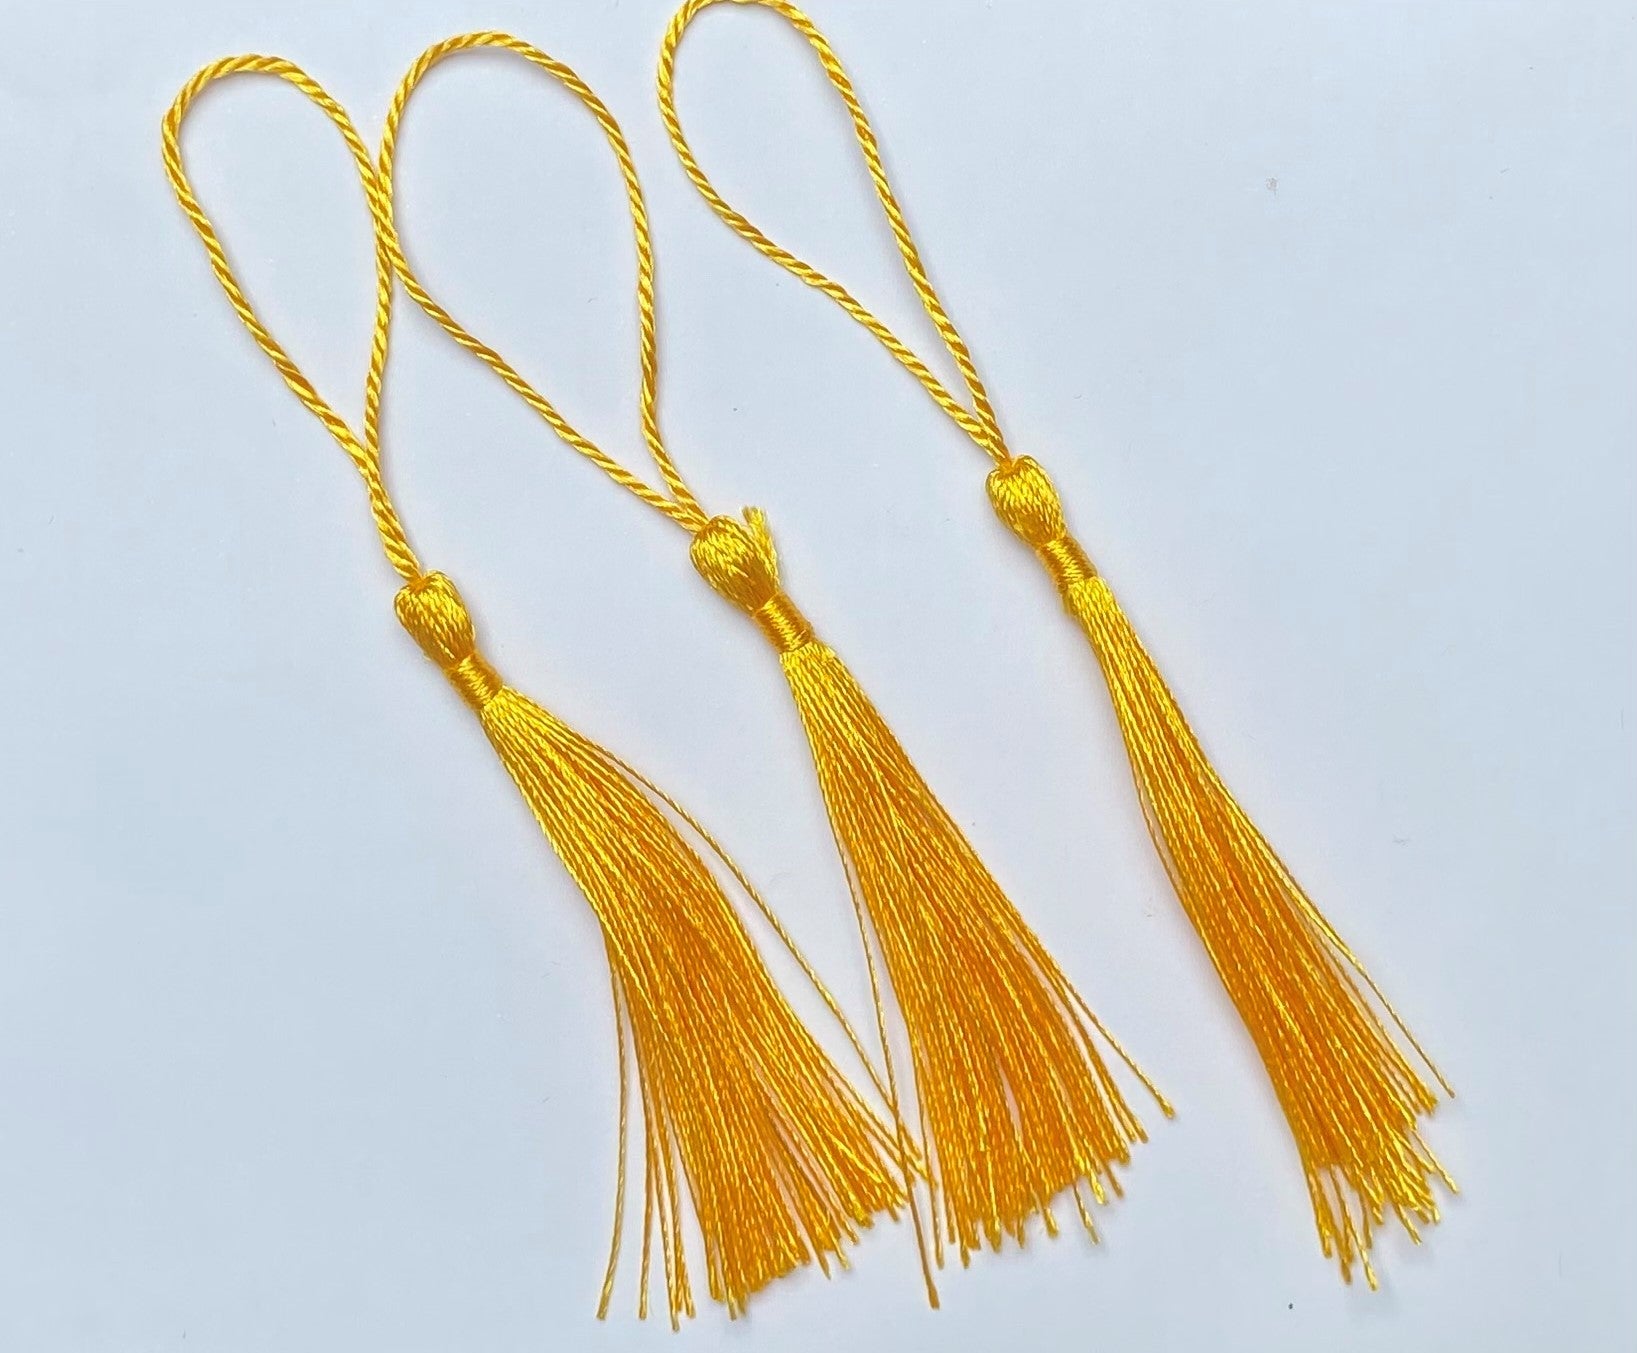 Sublimation Blank Bookmark Double Sided with Yellow Honeycomb Tassels, 4 Pieces, Size: Small